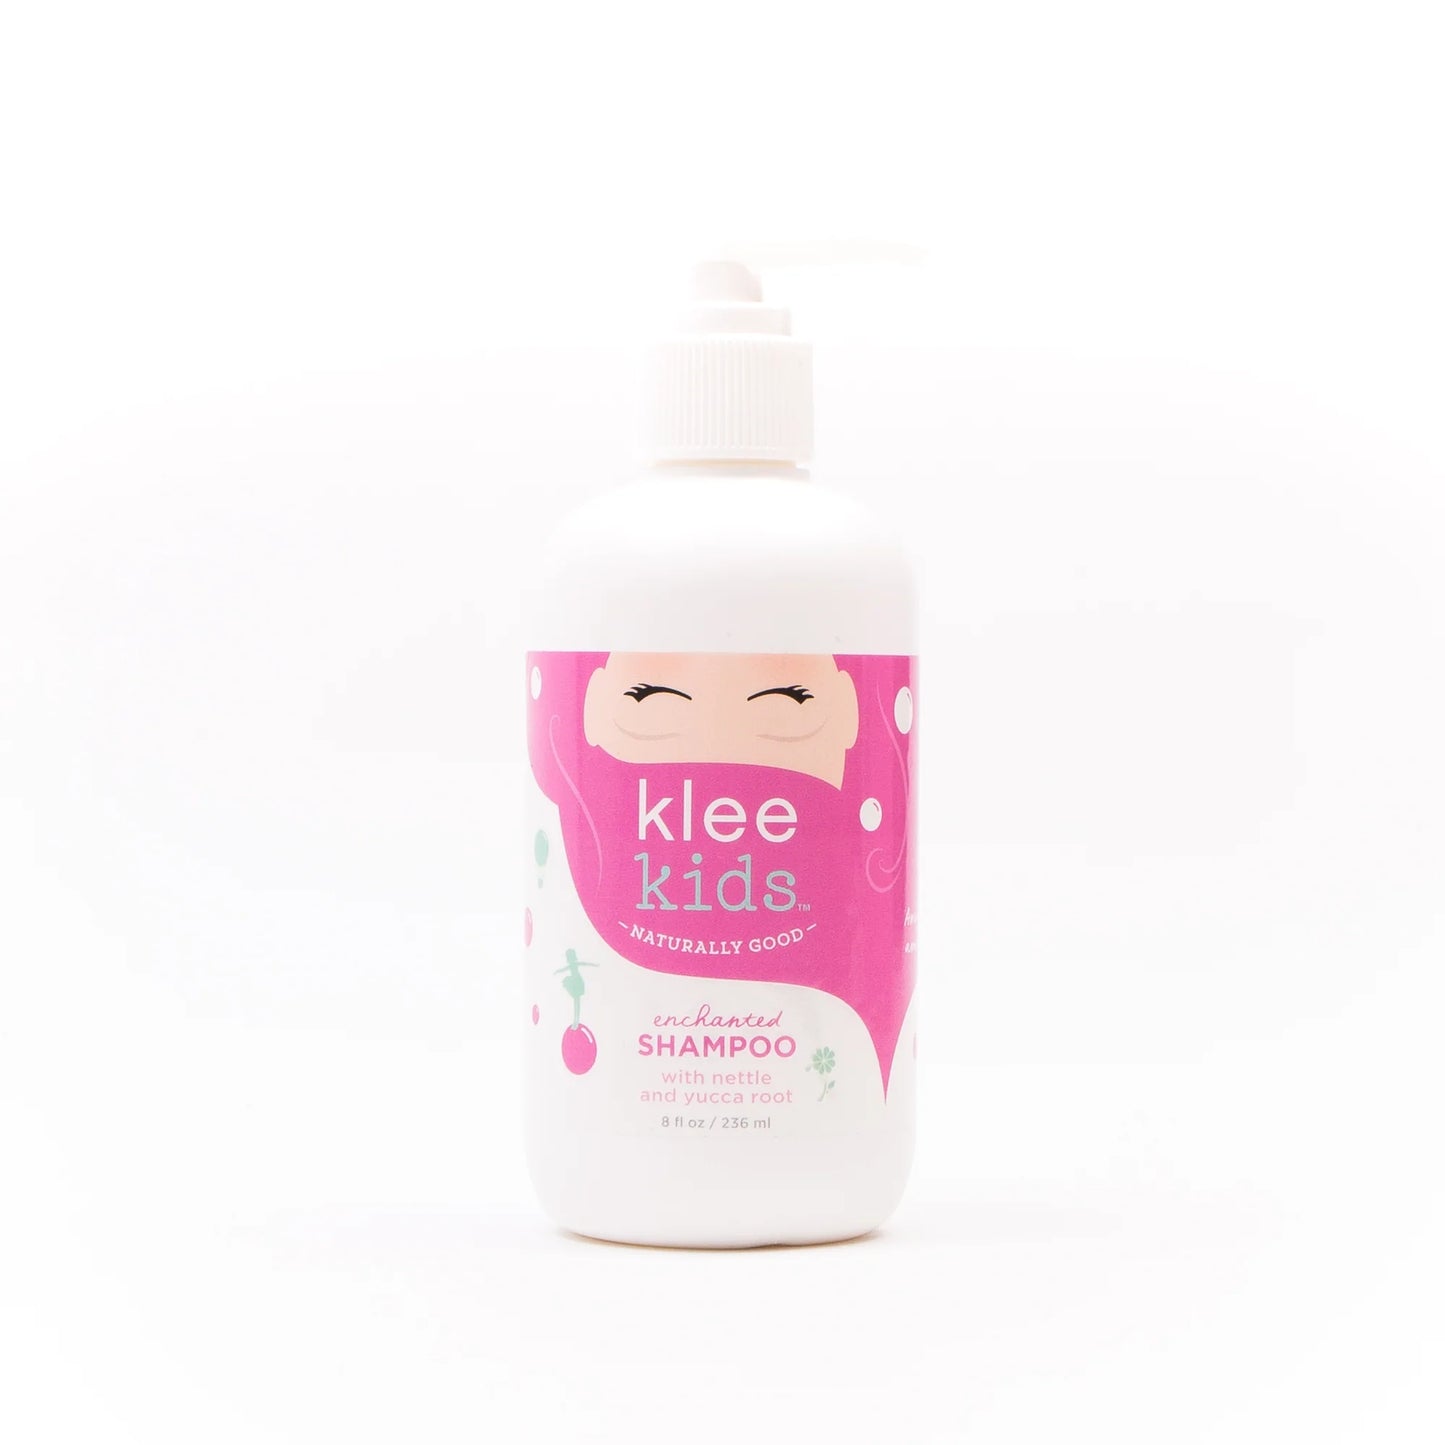 KLEE NATURALS | Enchanted Shampoo with Nettle & Yucca Root